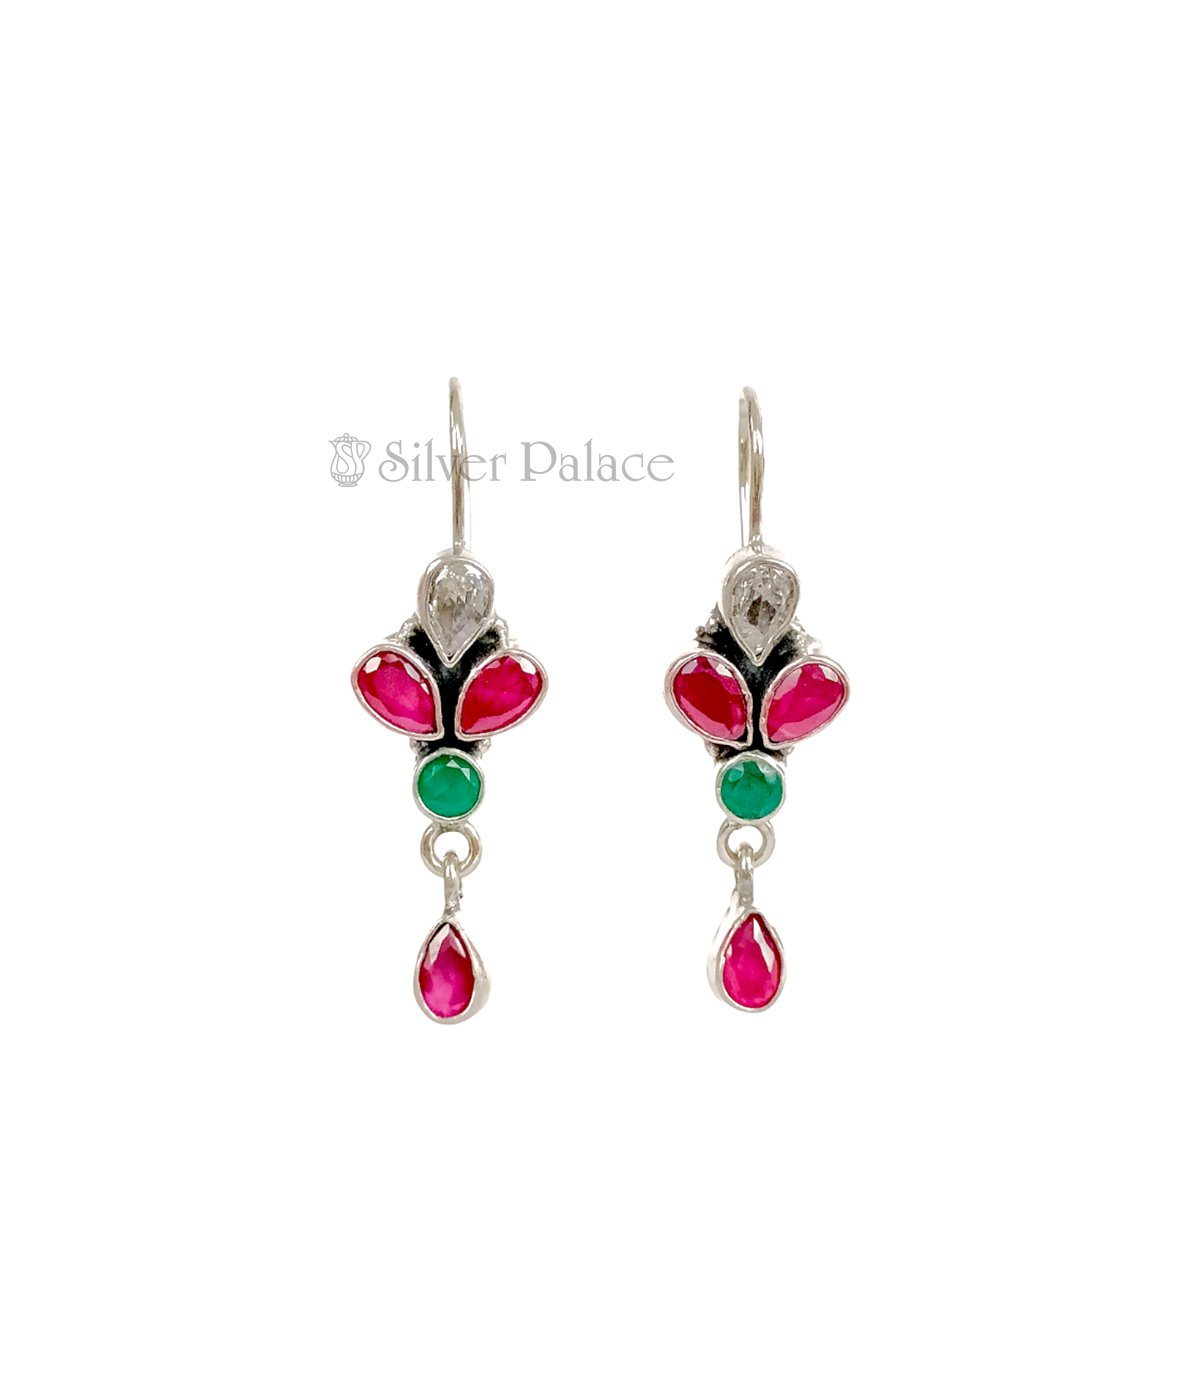 STERLING SILVER PINK GREEN STONE EARRINGS FOR ALL DAY WEAR